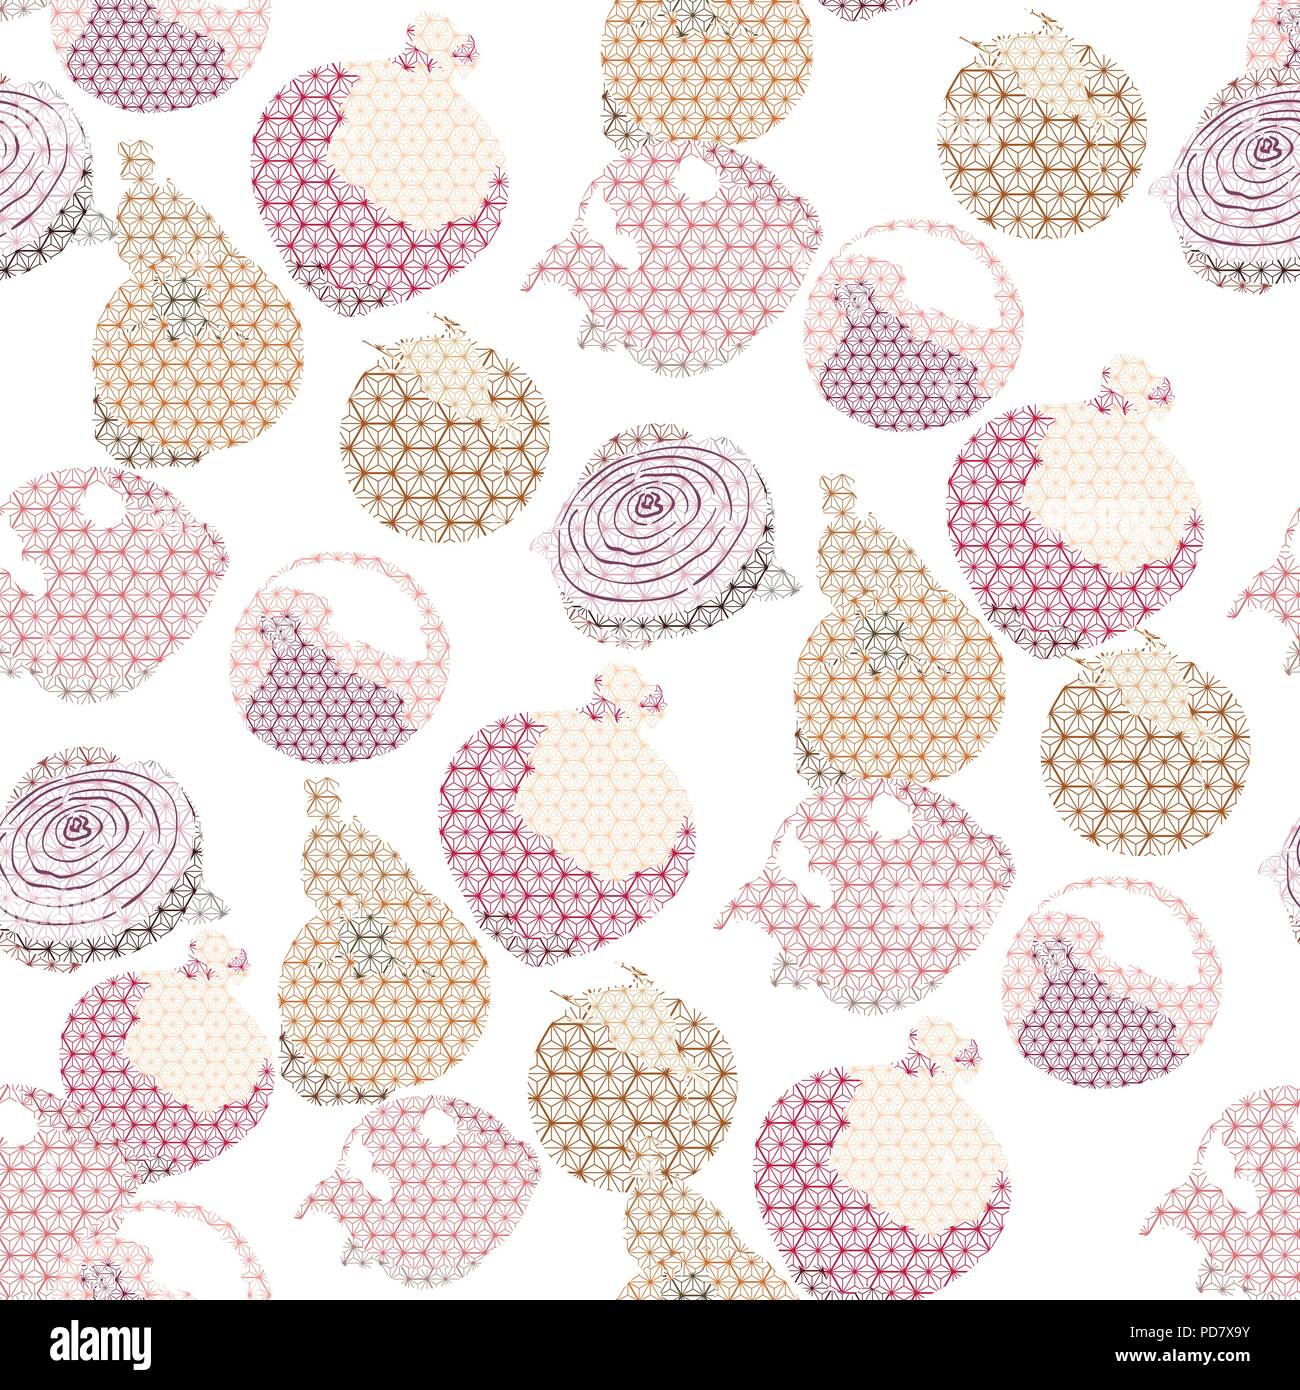 Onion and Shallots pattern vector. Vegetables background with Japanese pattern. Stock Vector